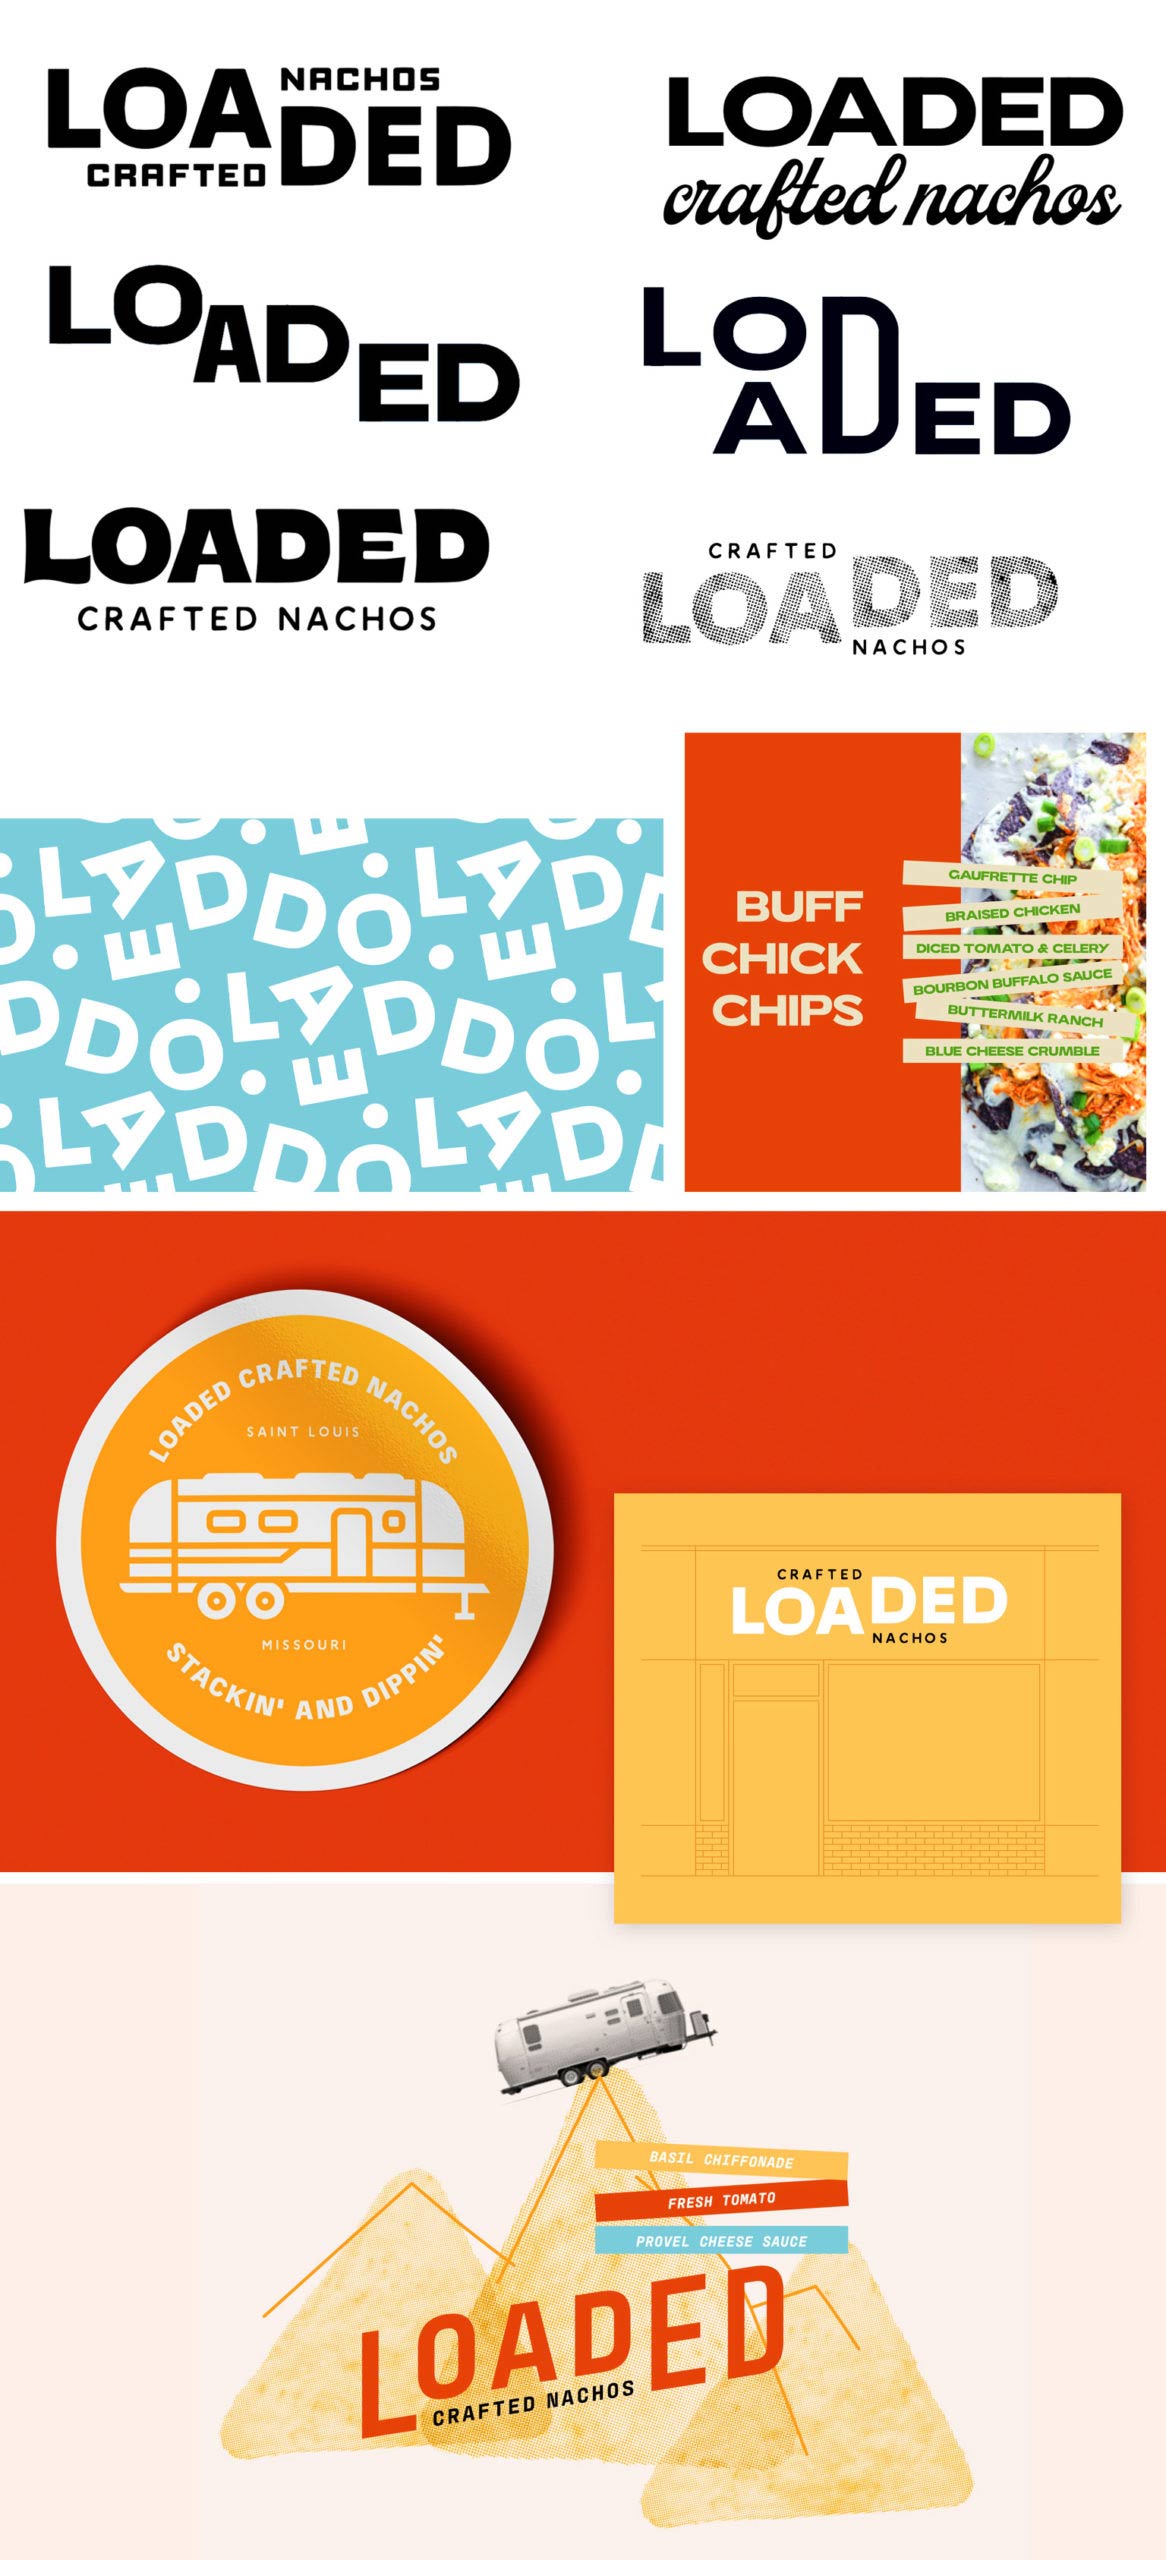 Early explorations of Loaded fast casual branding possibilities